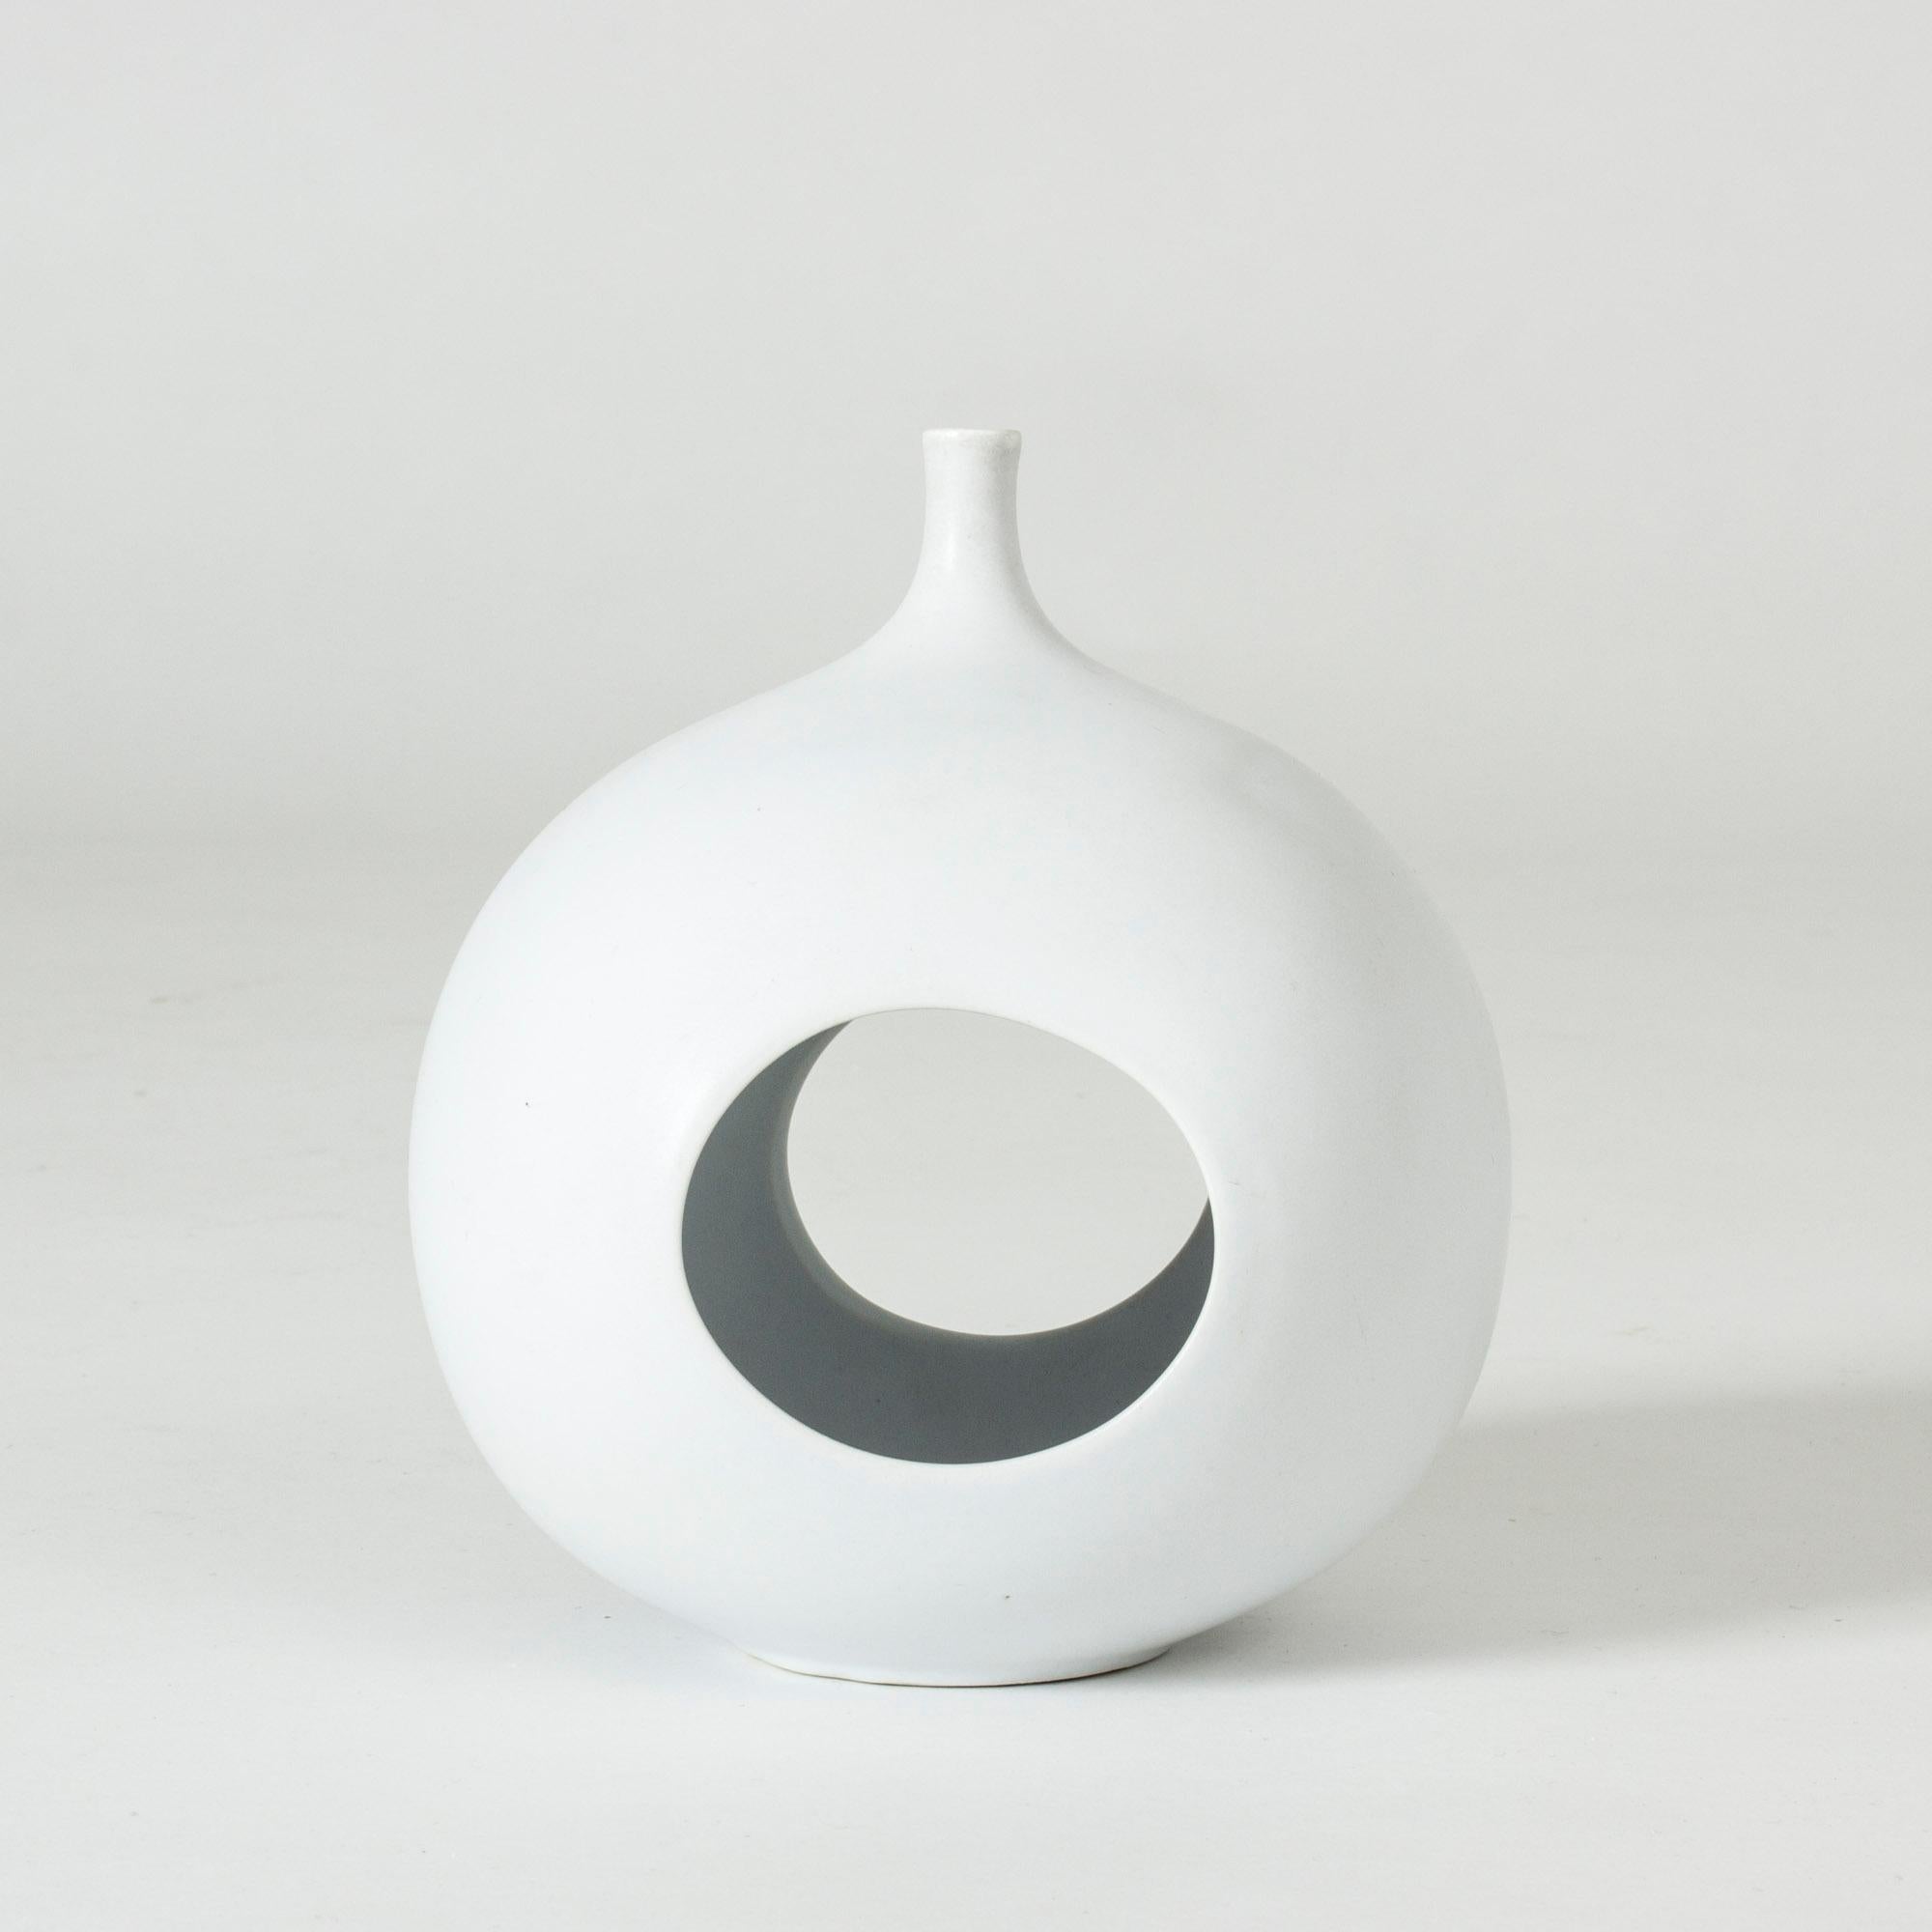 “Pungo” vase by Stig Lindberg, made in smooth Carrara glazed stoneware. This is a very rare piece in the “Pungo” series, which was produced between 1953 and 1964. Beautiful, clean lines with a sensual organic expression.